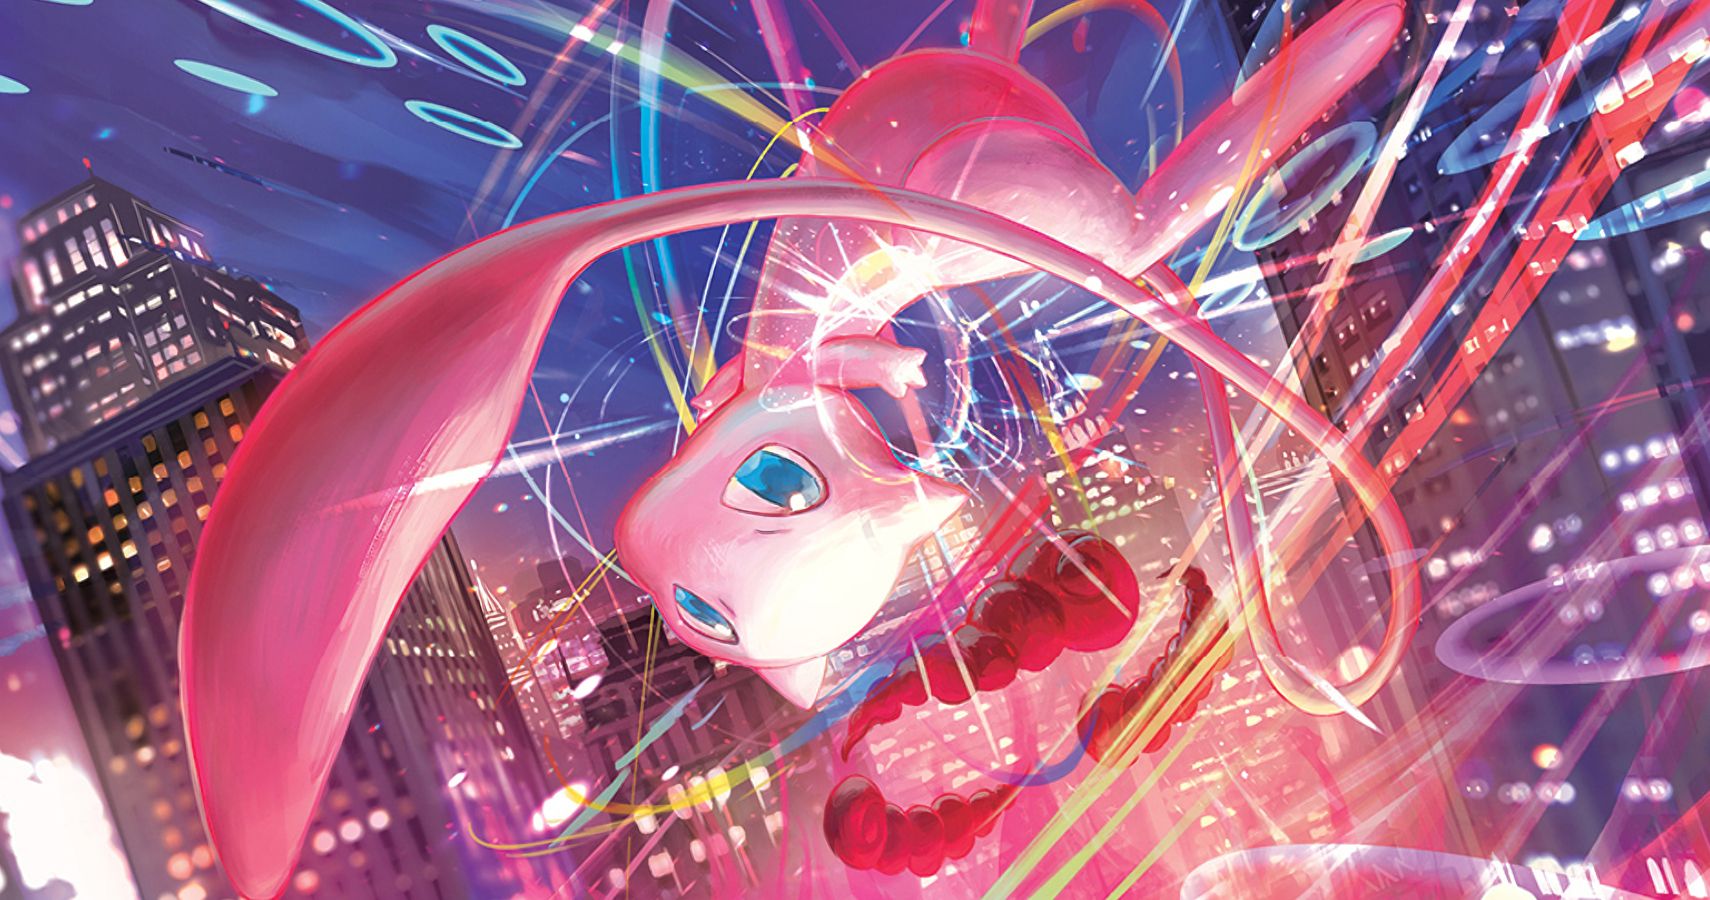 The key art for Fusion Strike, featuring Mew.